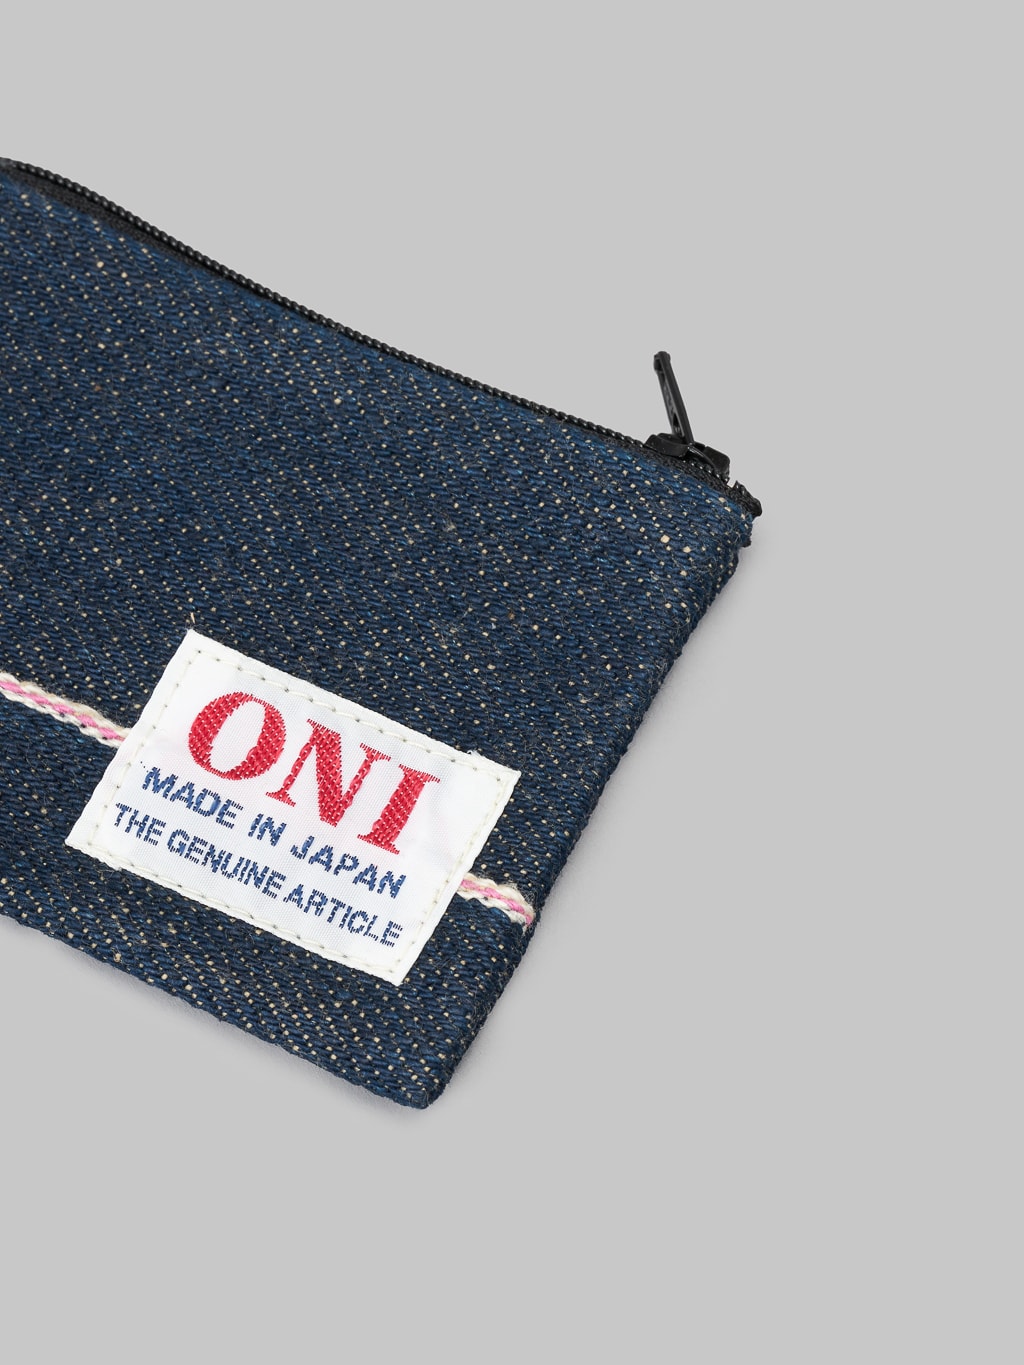 Oni denim selvedge coin pouch pink stitching